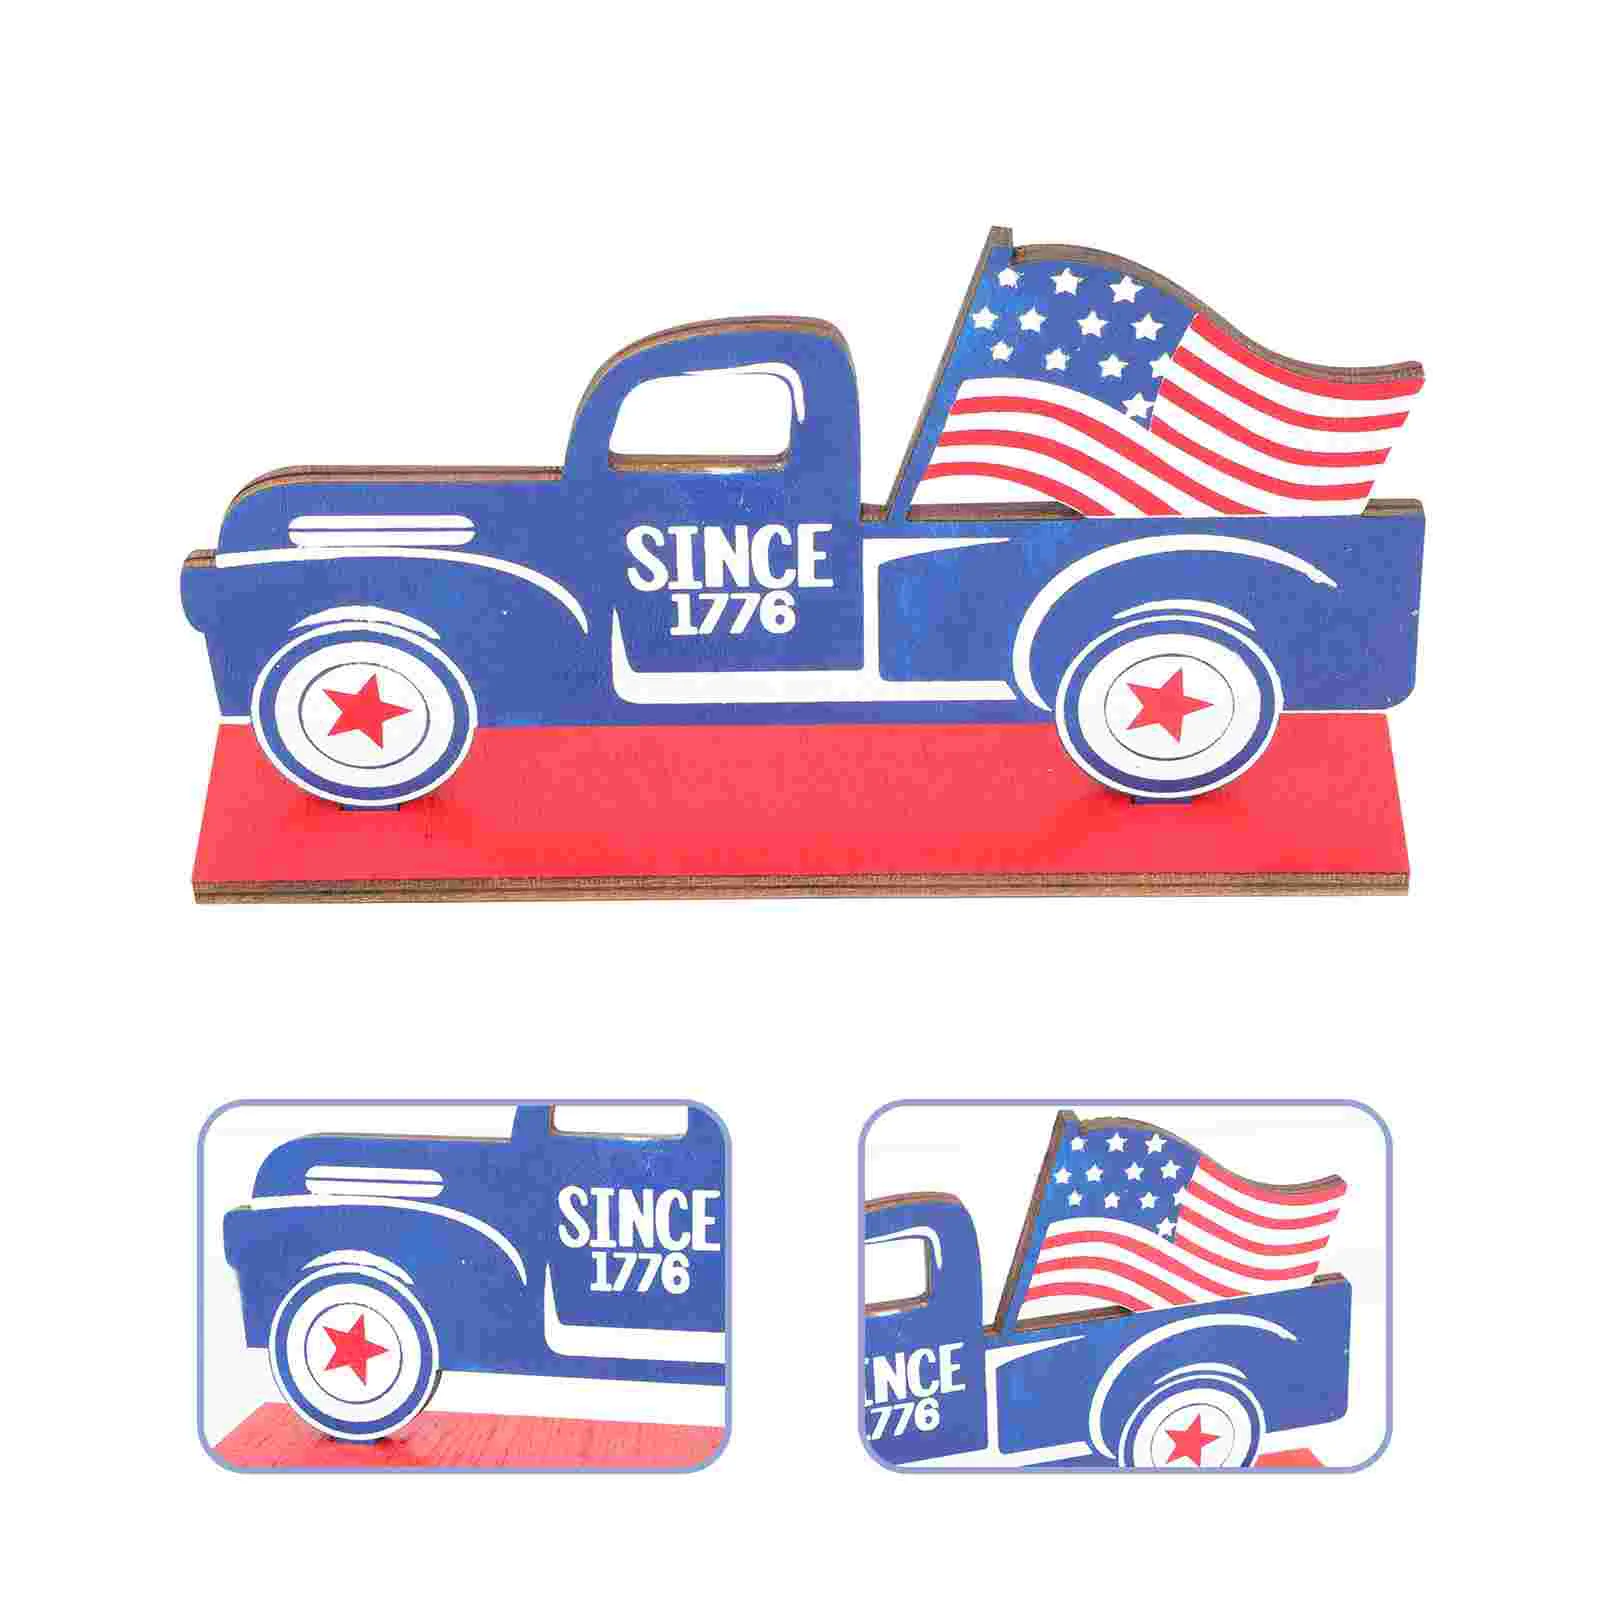 

Signjuly 4Th Day Wooden Independence Wood Centerpieces Desk Memorial Decoration Fourth Office Patriotic Truck Signs Welcome